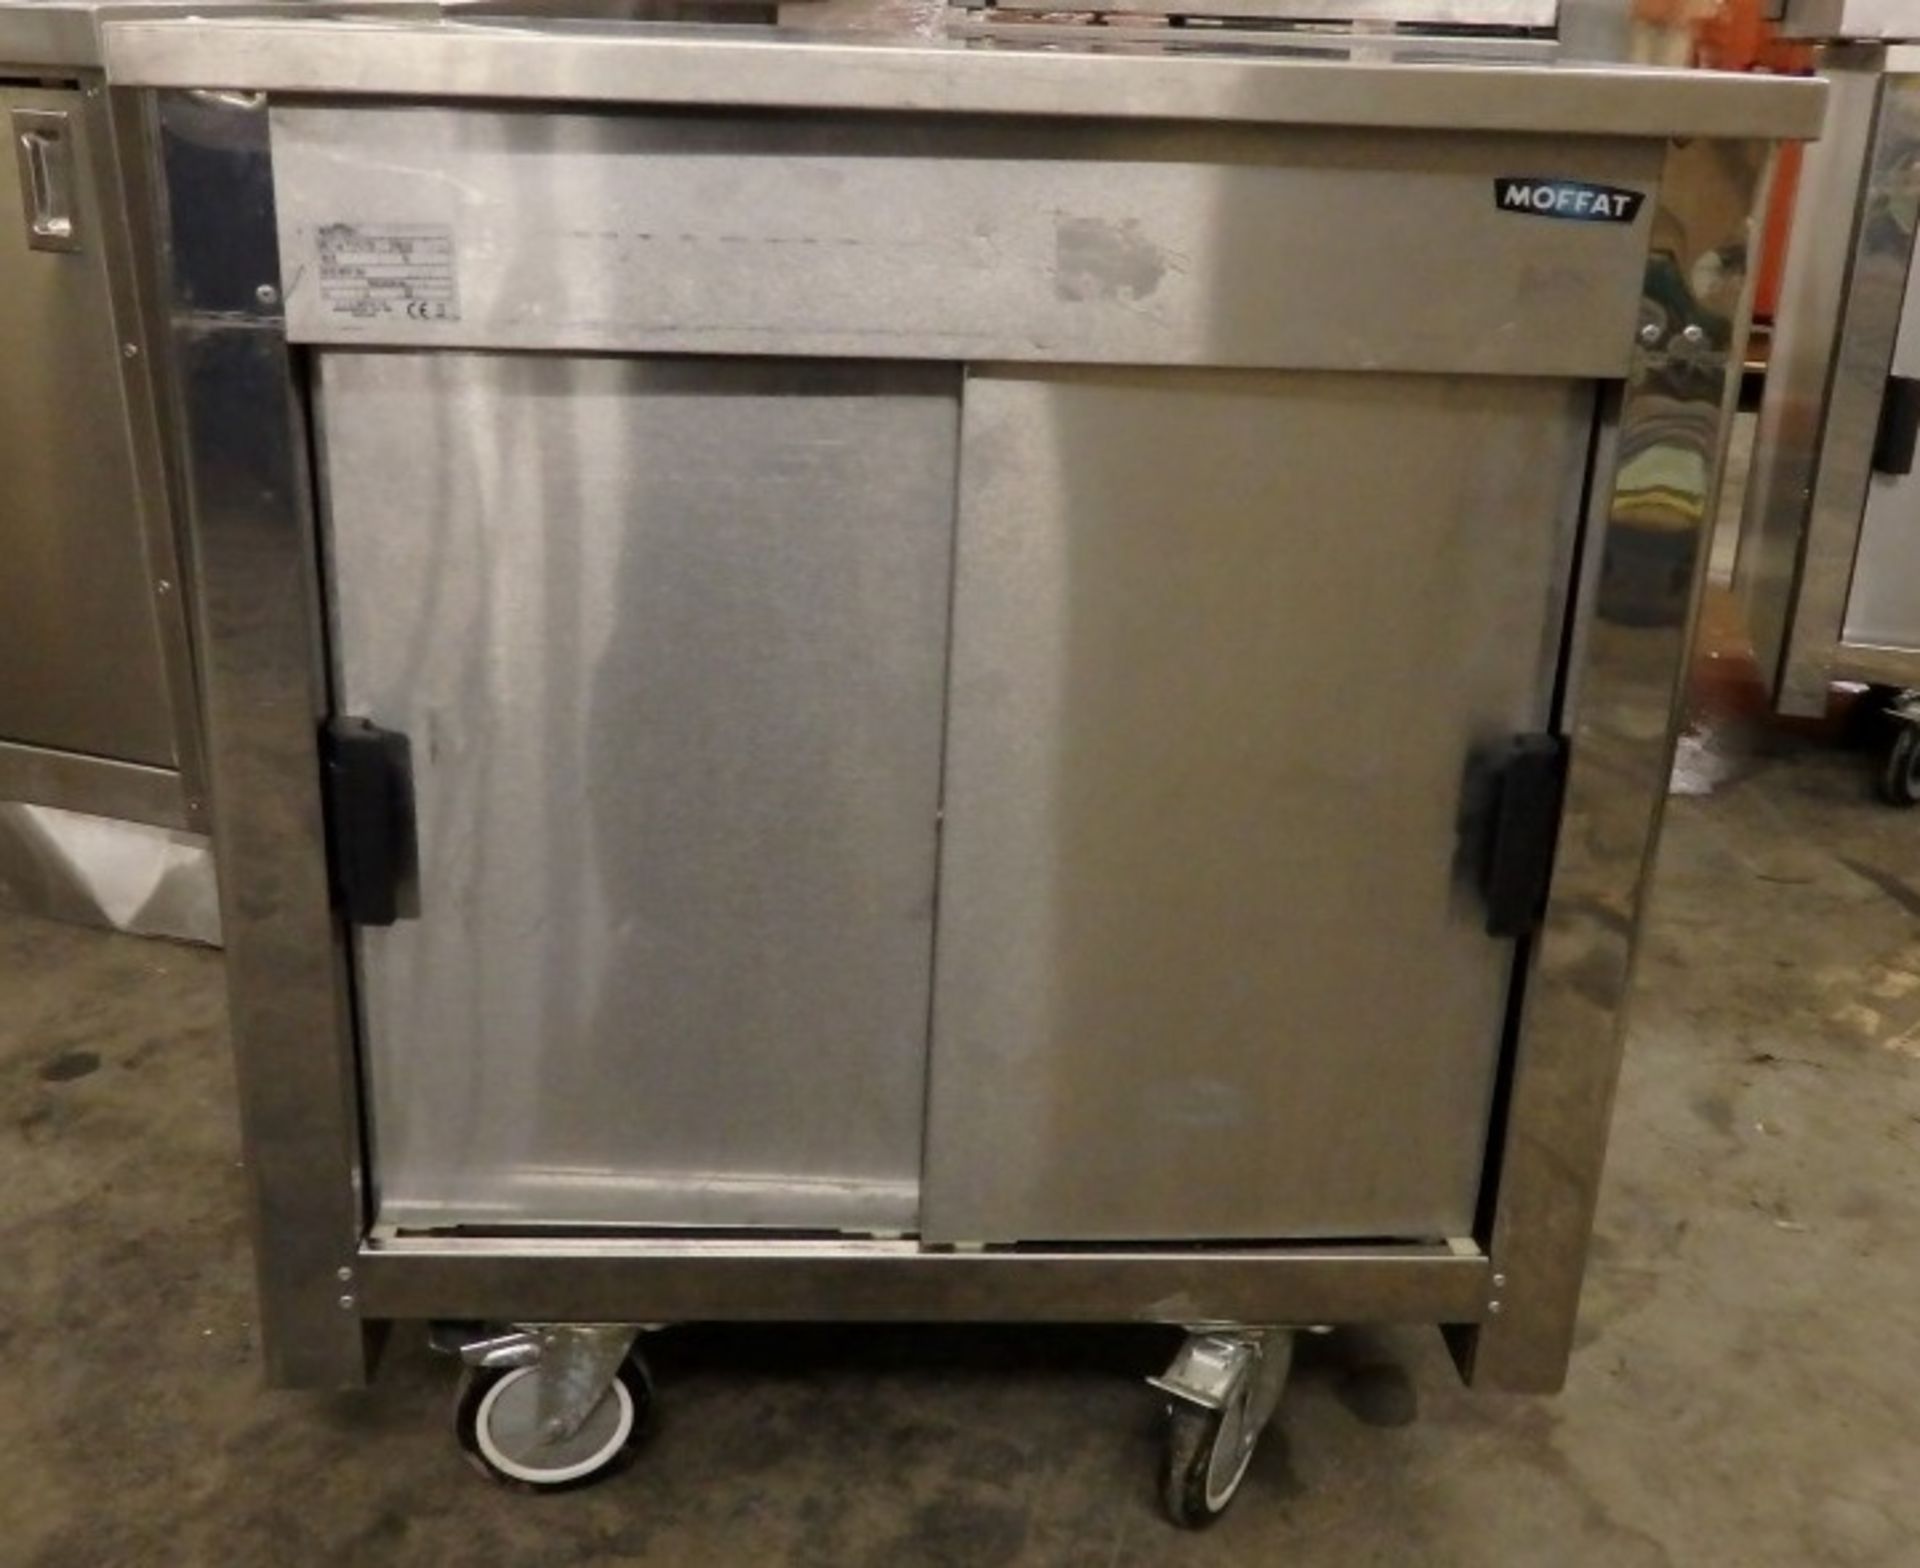 1 x Serving Counter With Storage - On Castors For Maneuverability - Ideal For Pub Carvery, Canteens, - Image 7 of 9